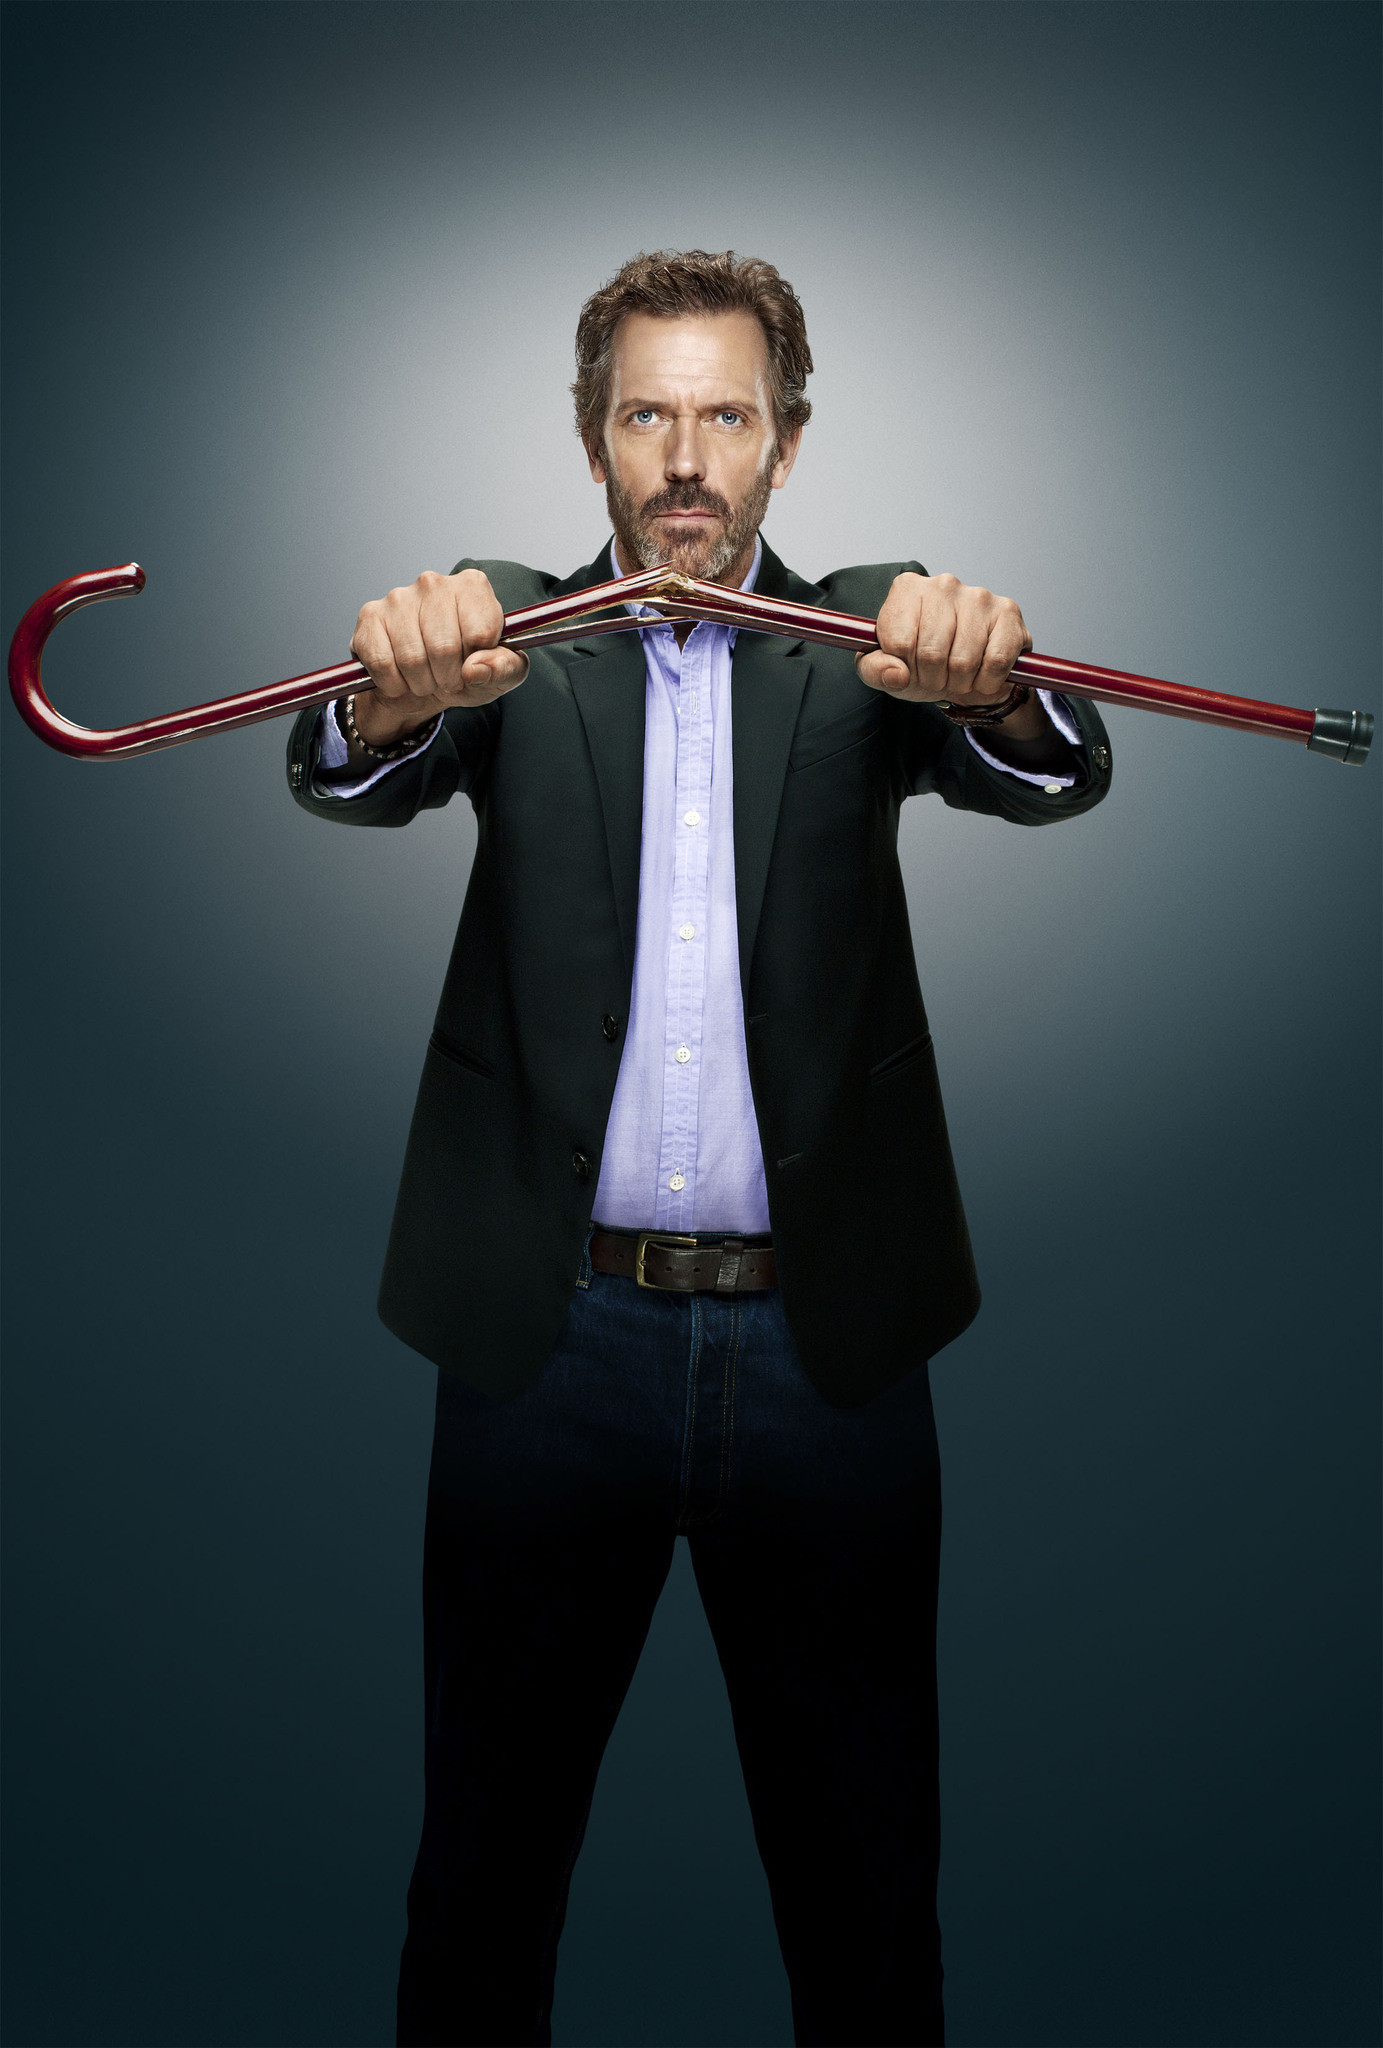 Dr House - House Md Poster Hd - HD Wallpaper 